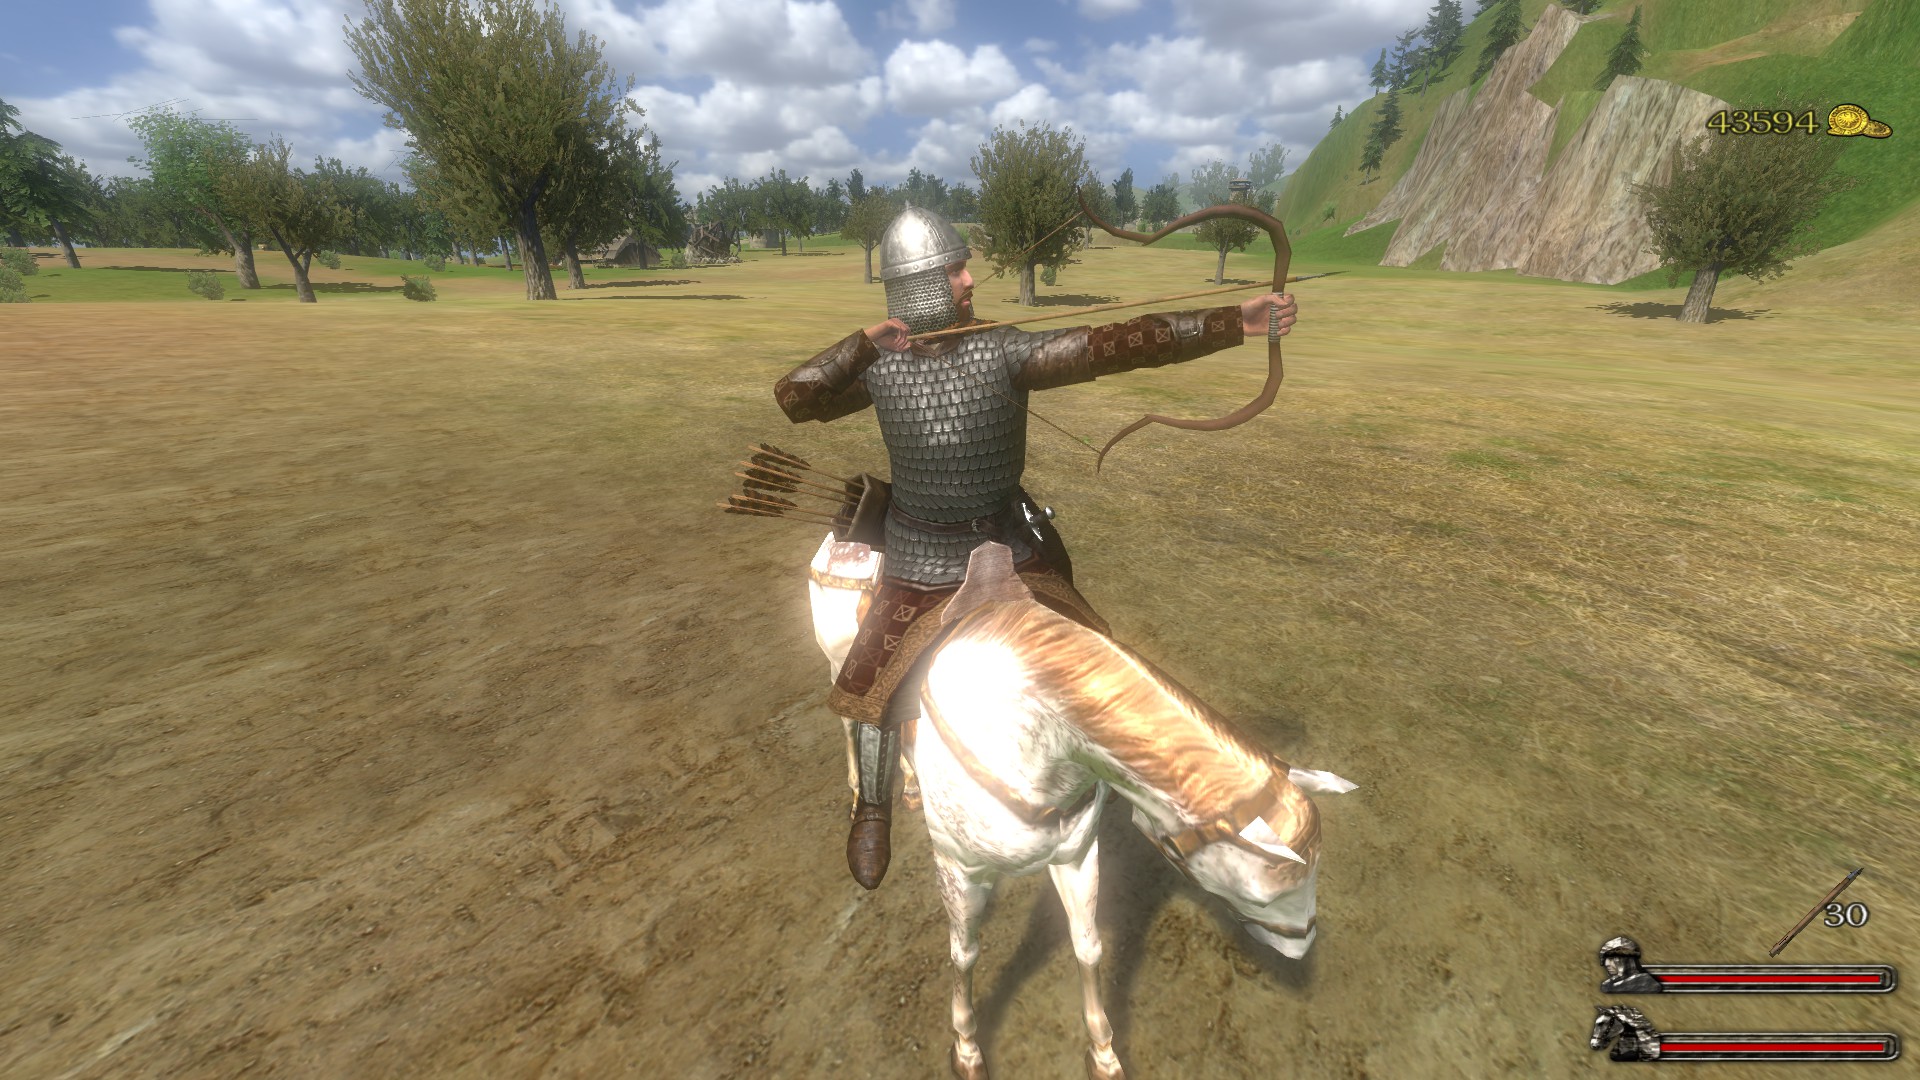 Screenshots image - Persistent Age mod for Mount & Blade: Warband.